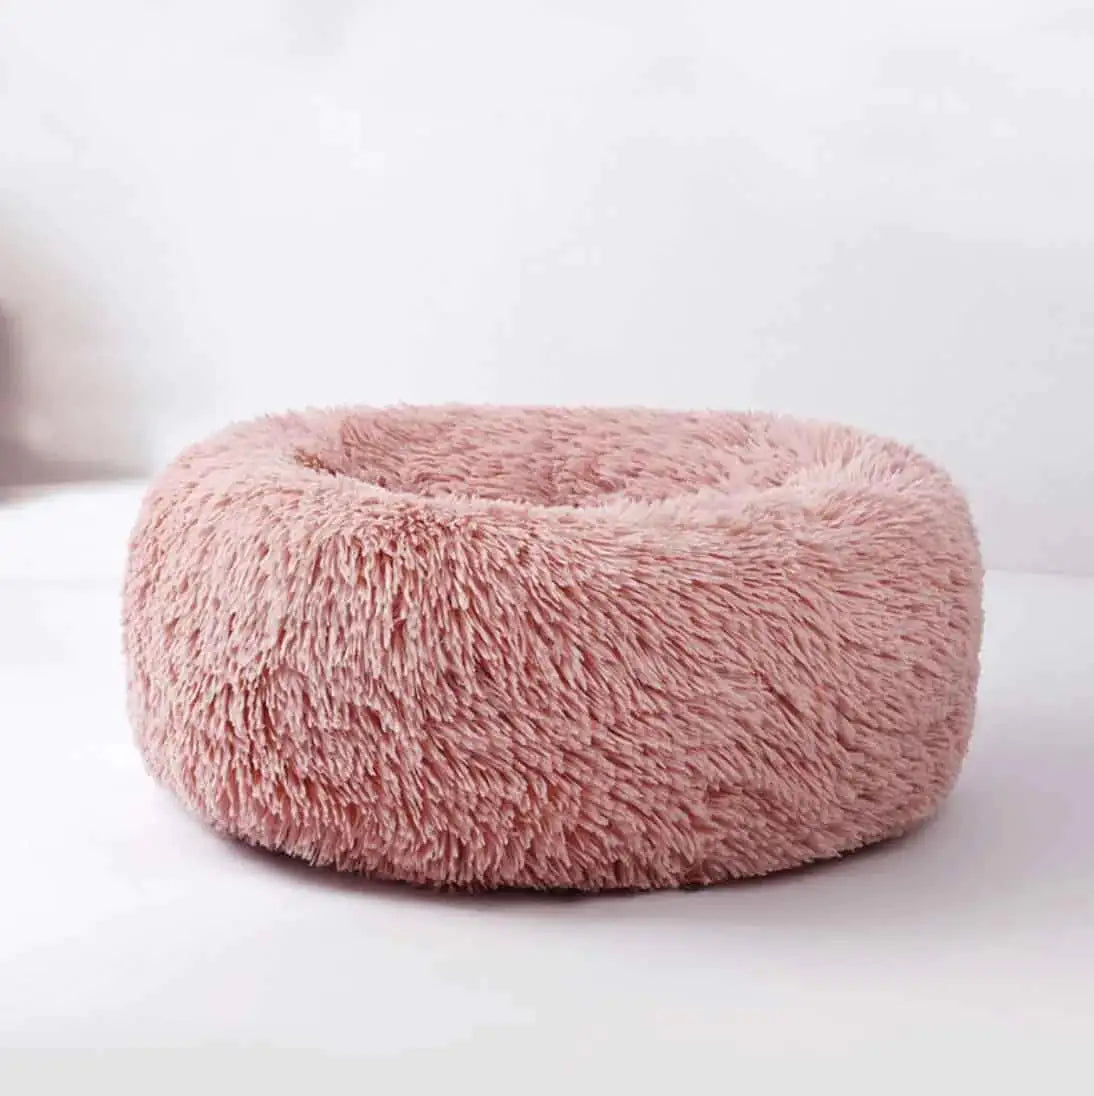 Comfy Calming Dog Bed - Plush Materials, Cozy Design for All Dog Sizes